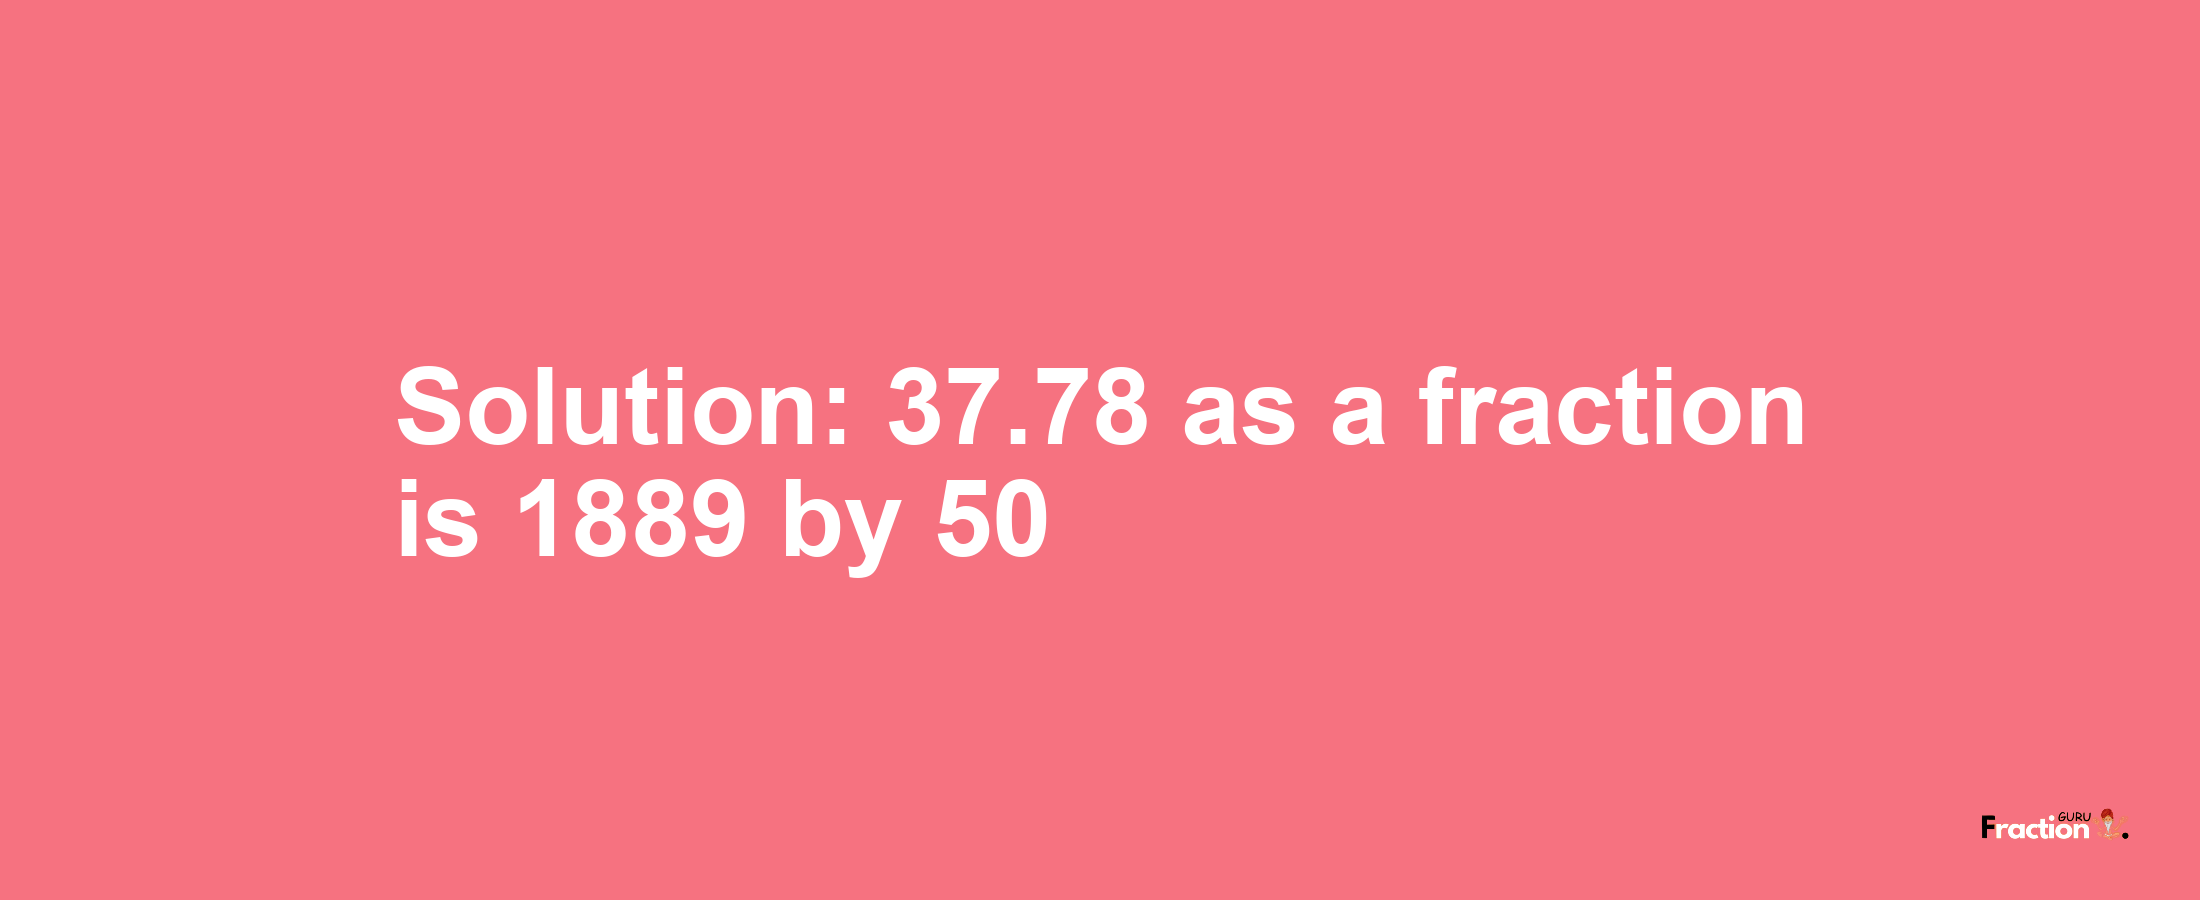 Solution:37.78 as a fraction is 1889/50